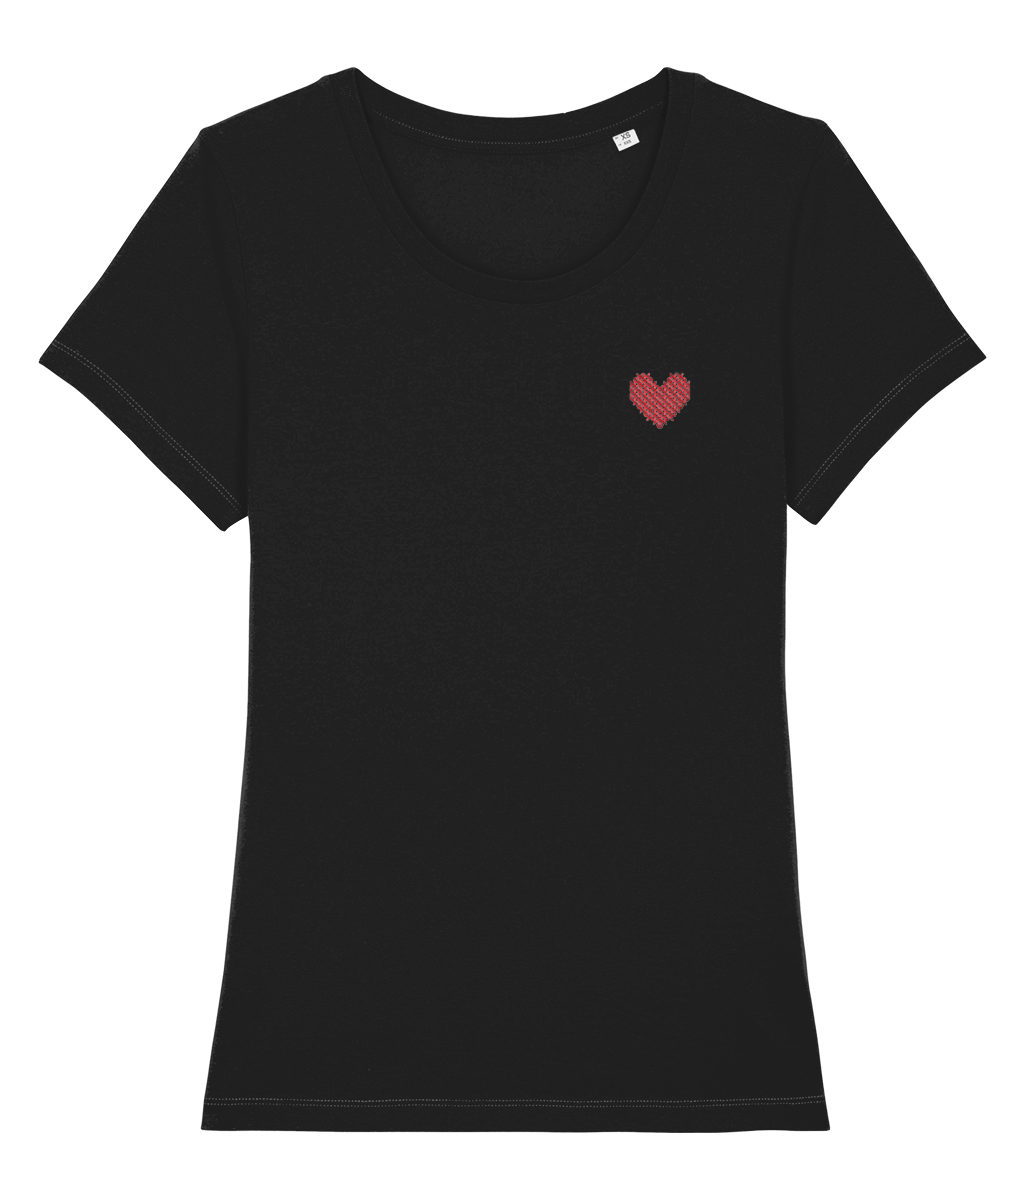 Made With Love Embroidered Red Heart Women's Fit Tee